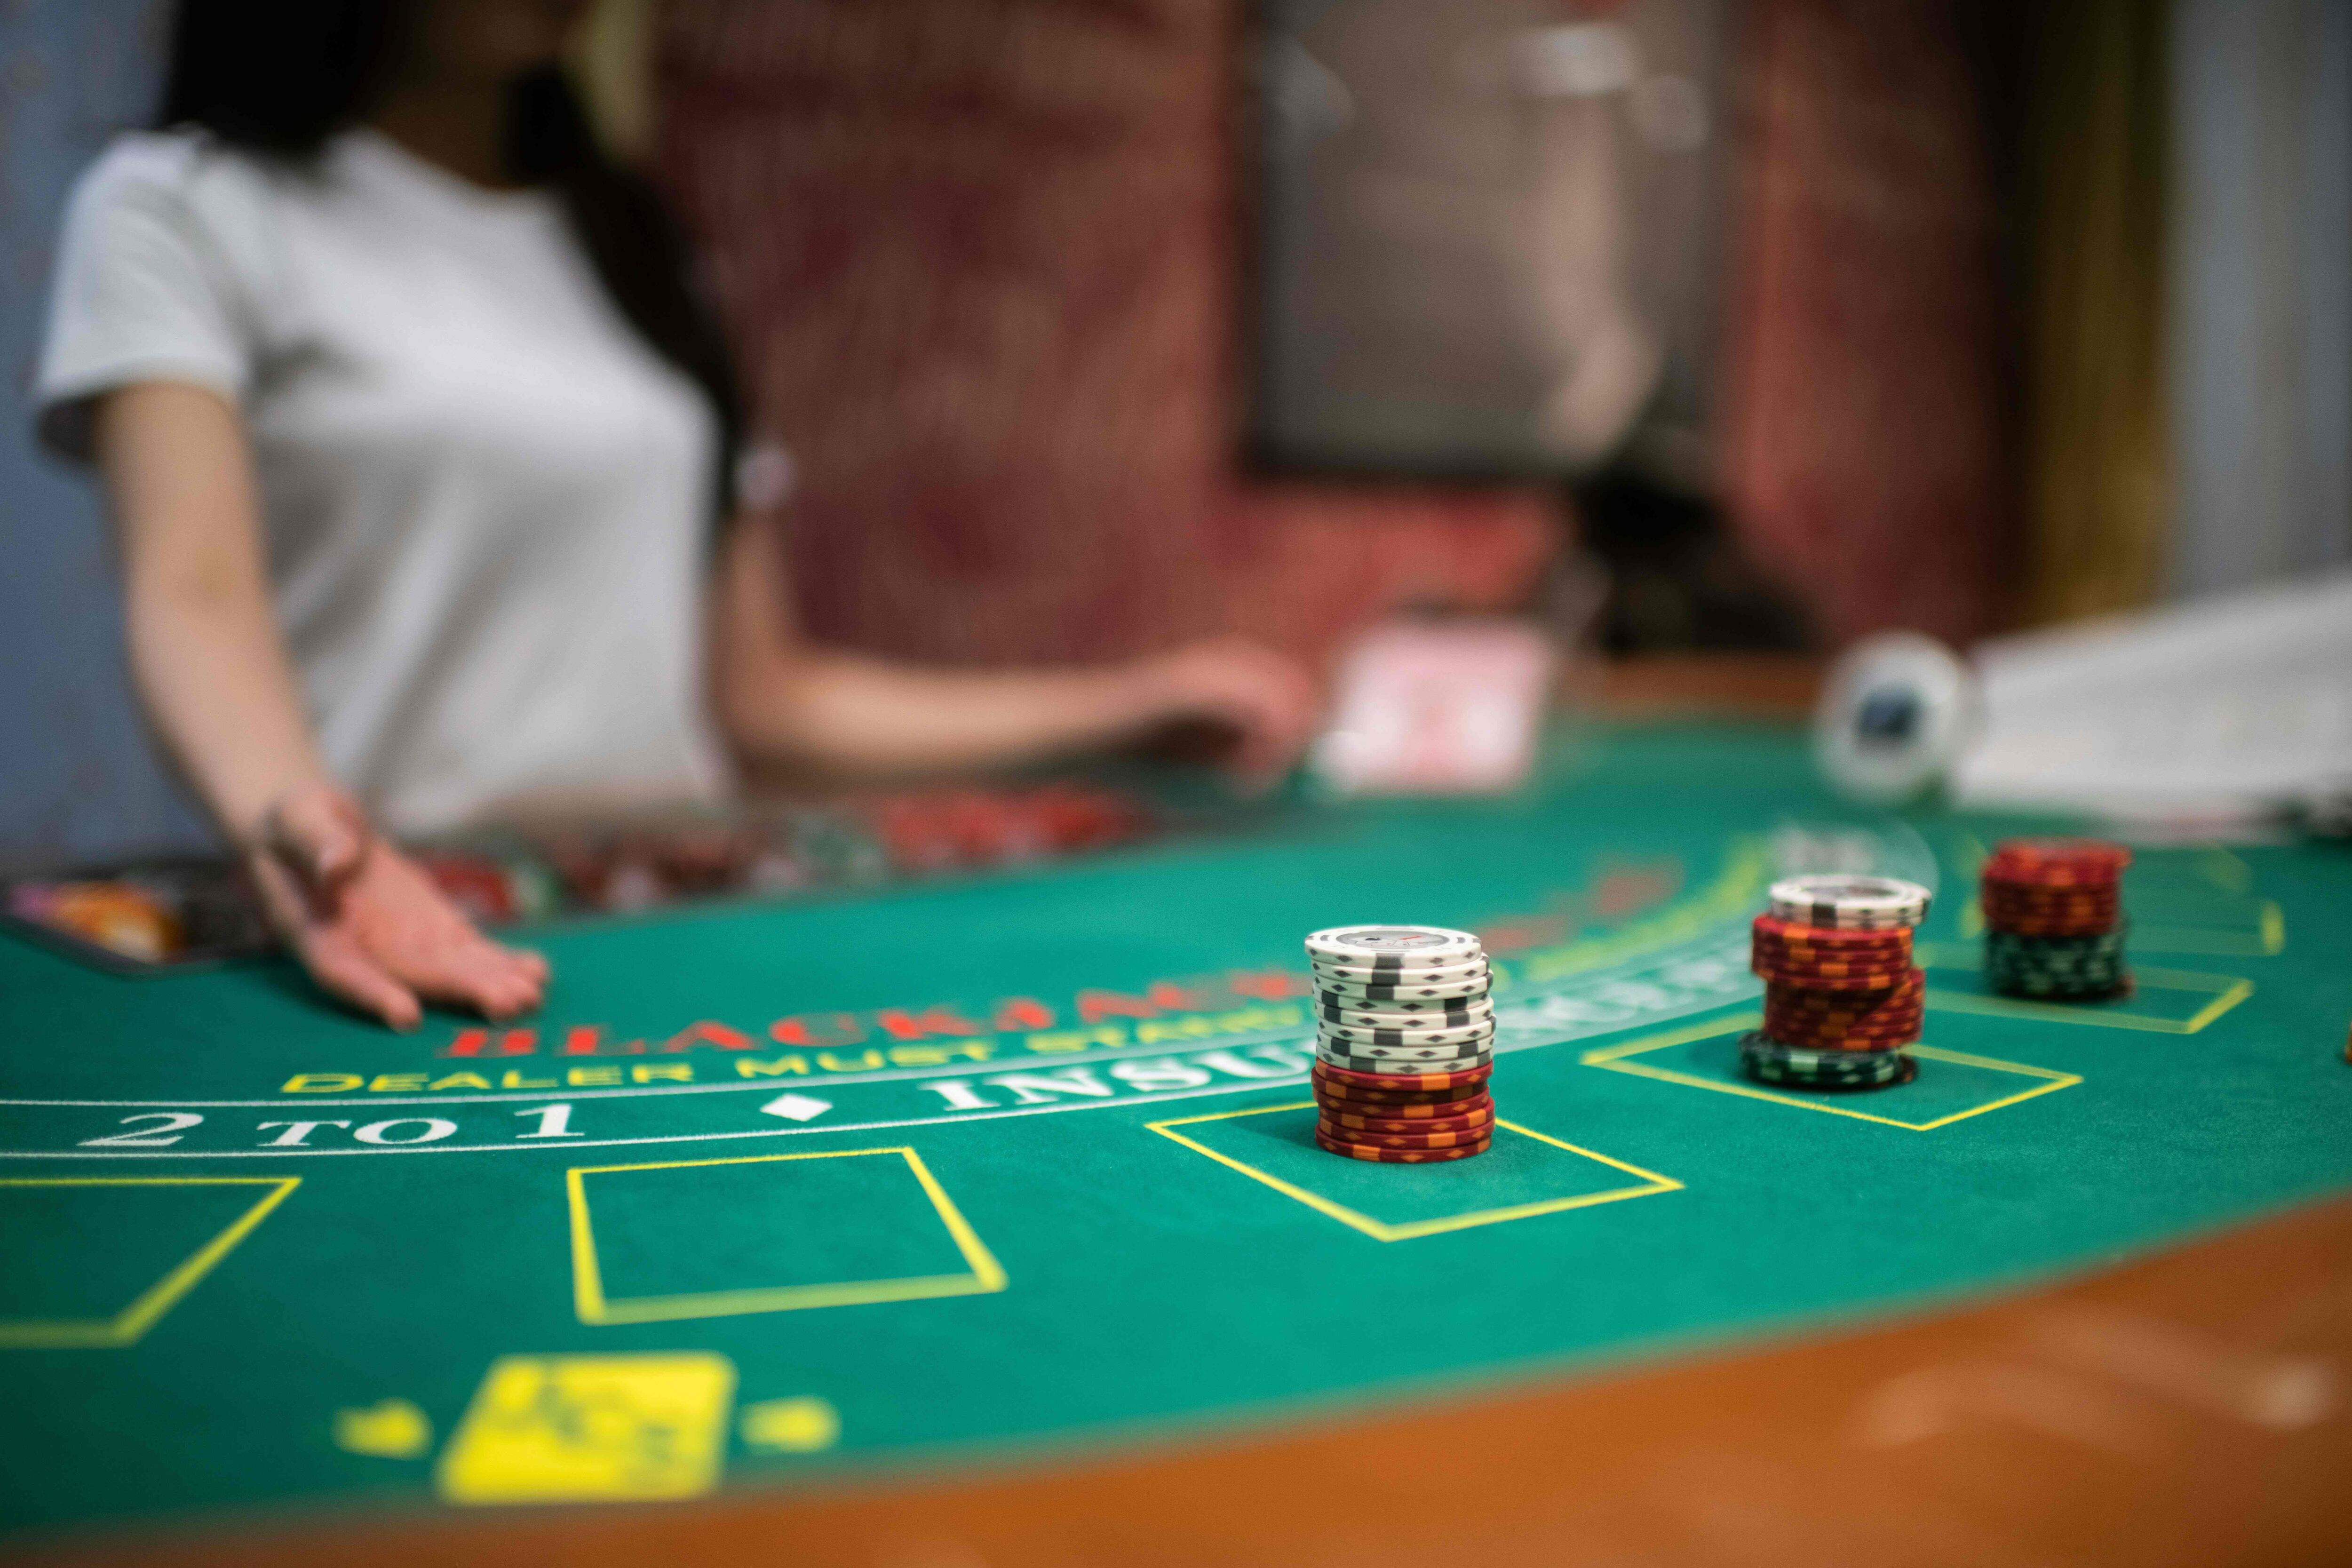 Japan goes from banning to approving the country’s first legal casino